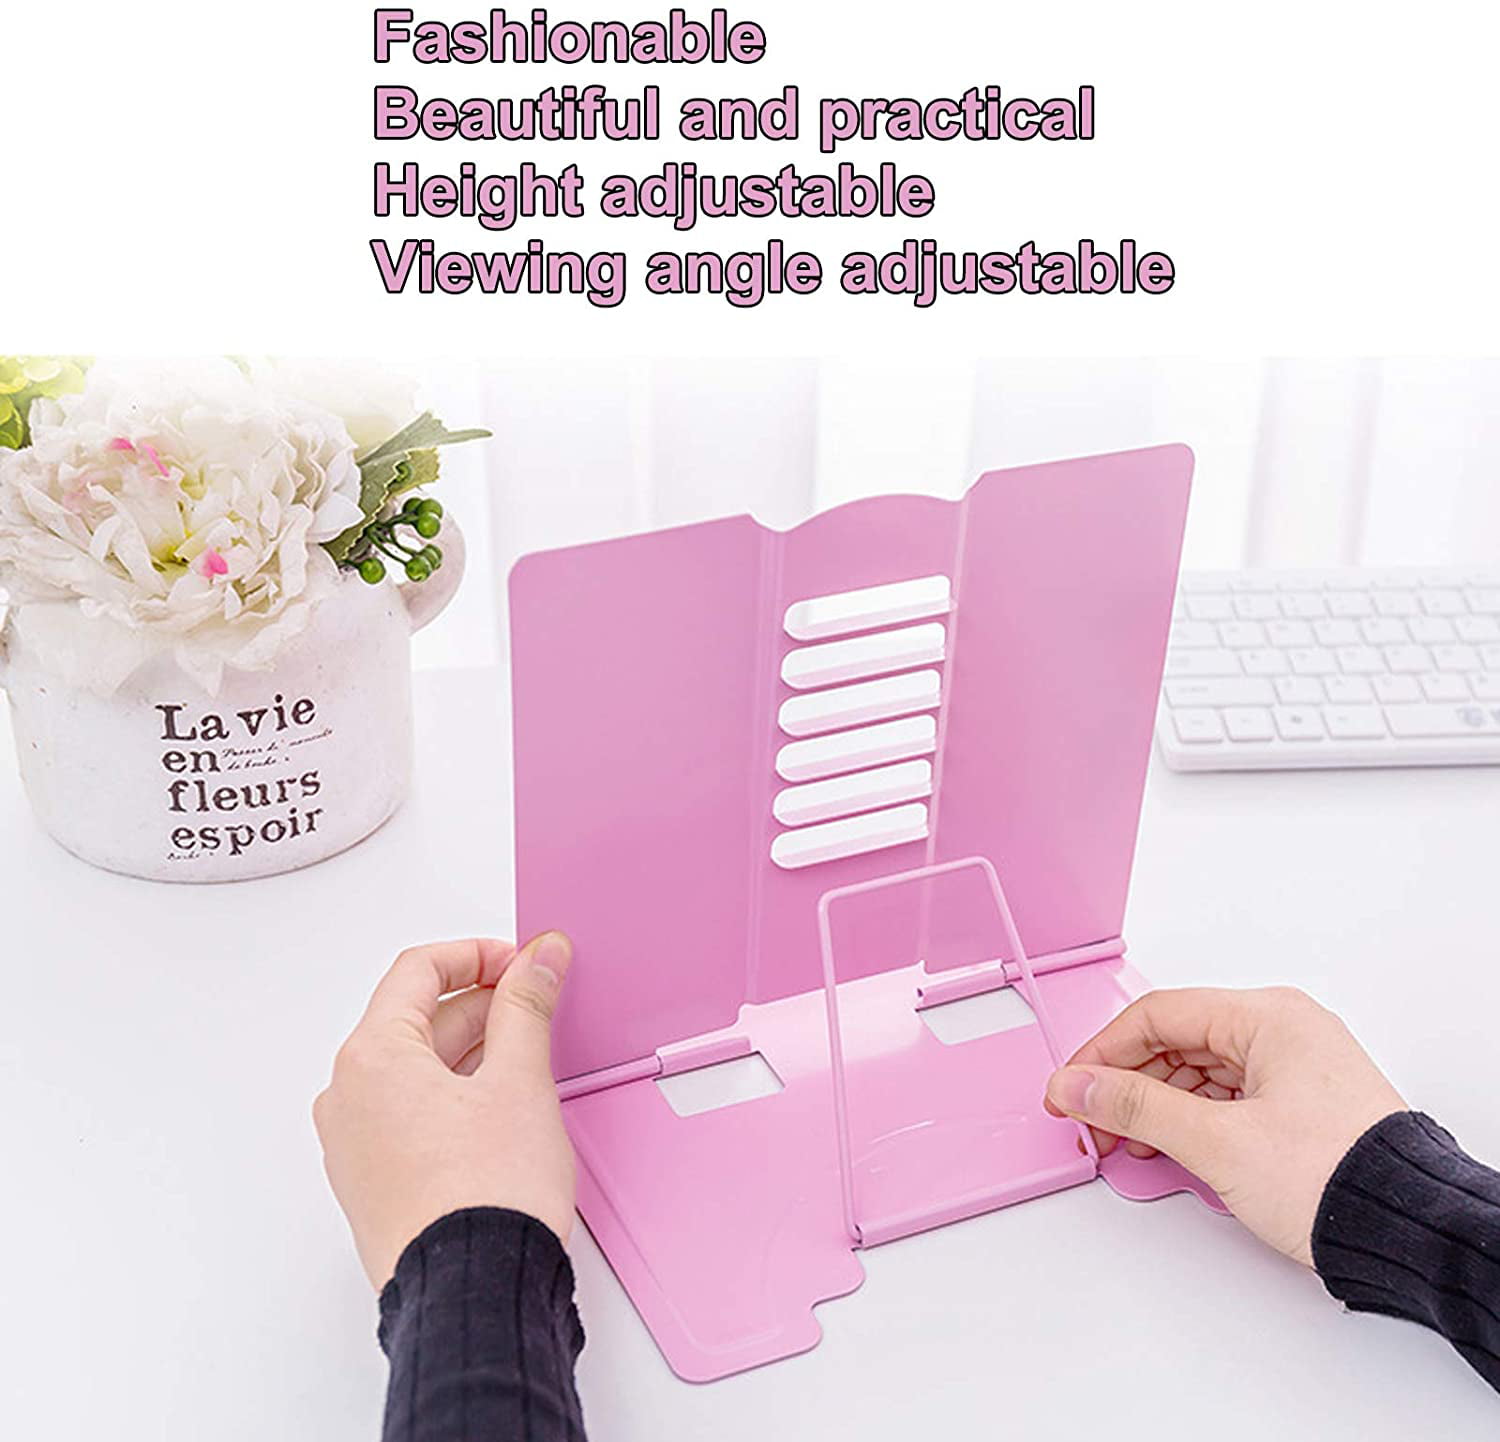 Metal Book Stand Desk Book Stand Metal Reading Rest Book Holder Adjustable  Portable Reading Book Stand for Textbooks, Notebooks, Drawing Books